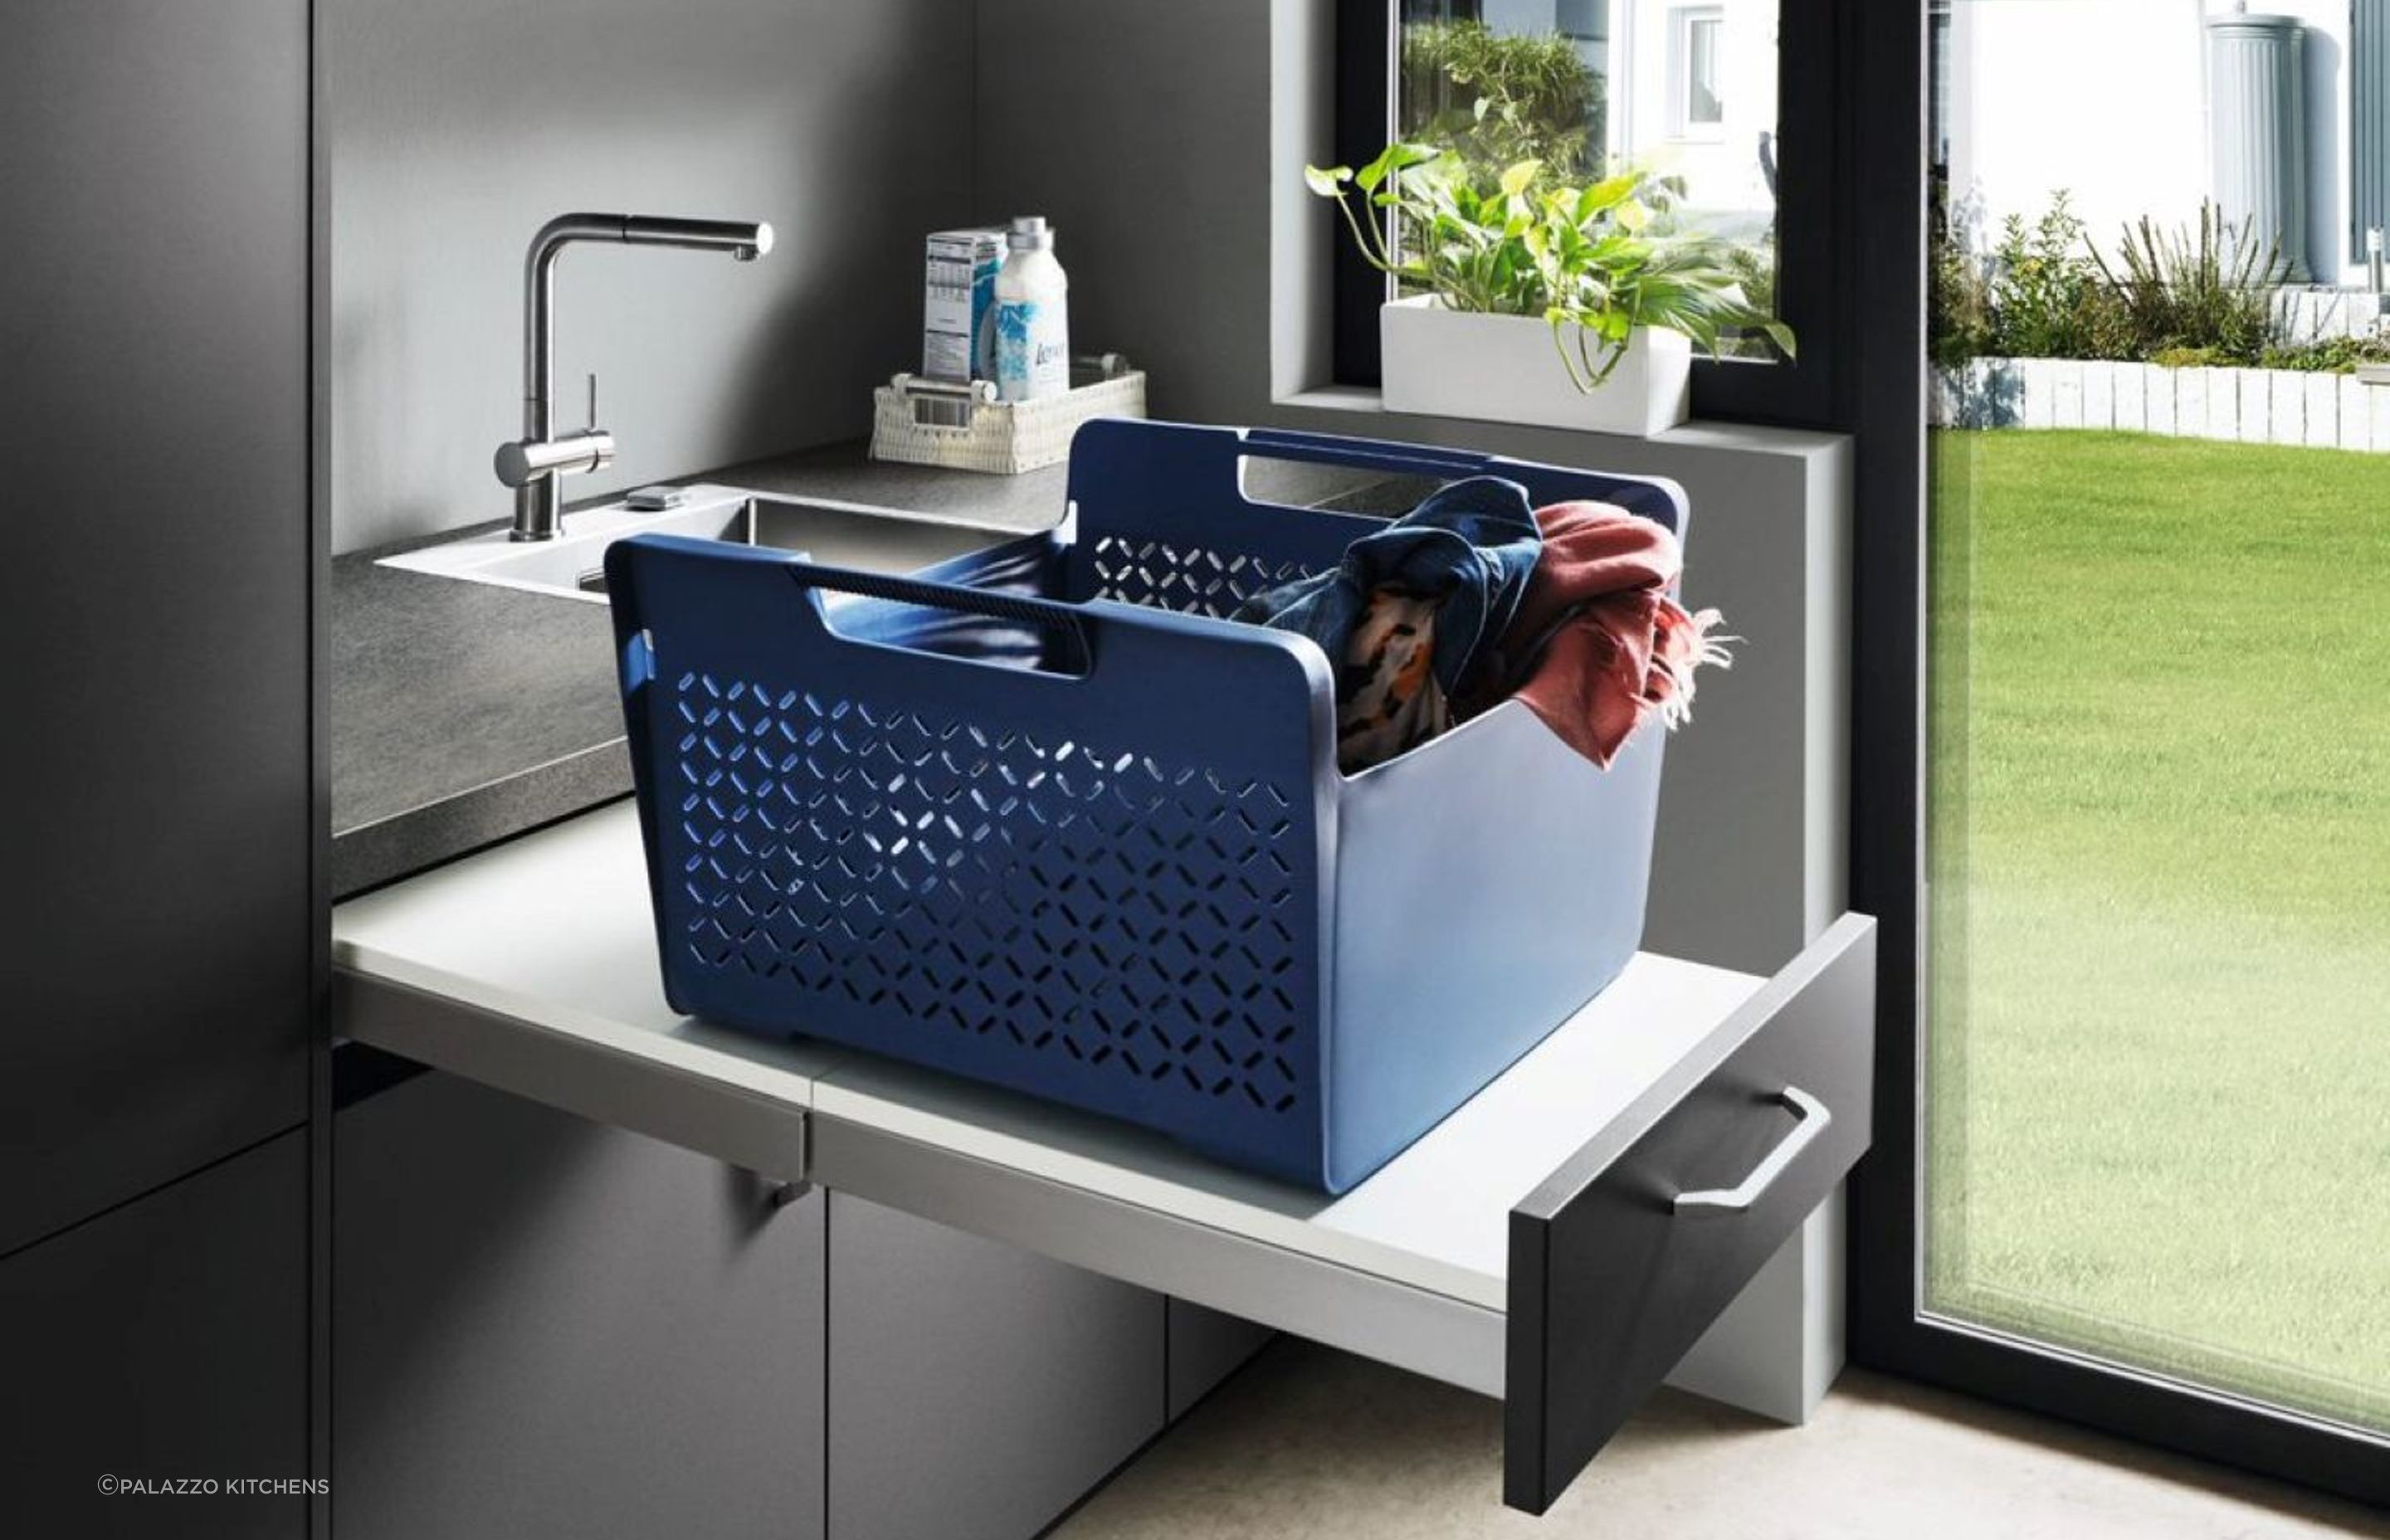 A pull-out surface can make your daily laundry chores so much easier, demonstrated with aplomb here using Touch Laundry Cabinetry by Nobilia.